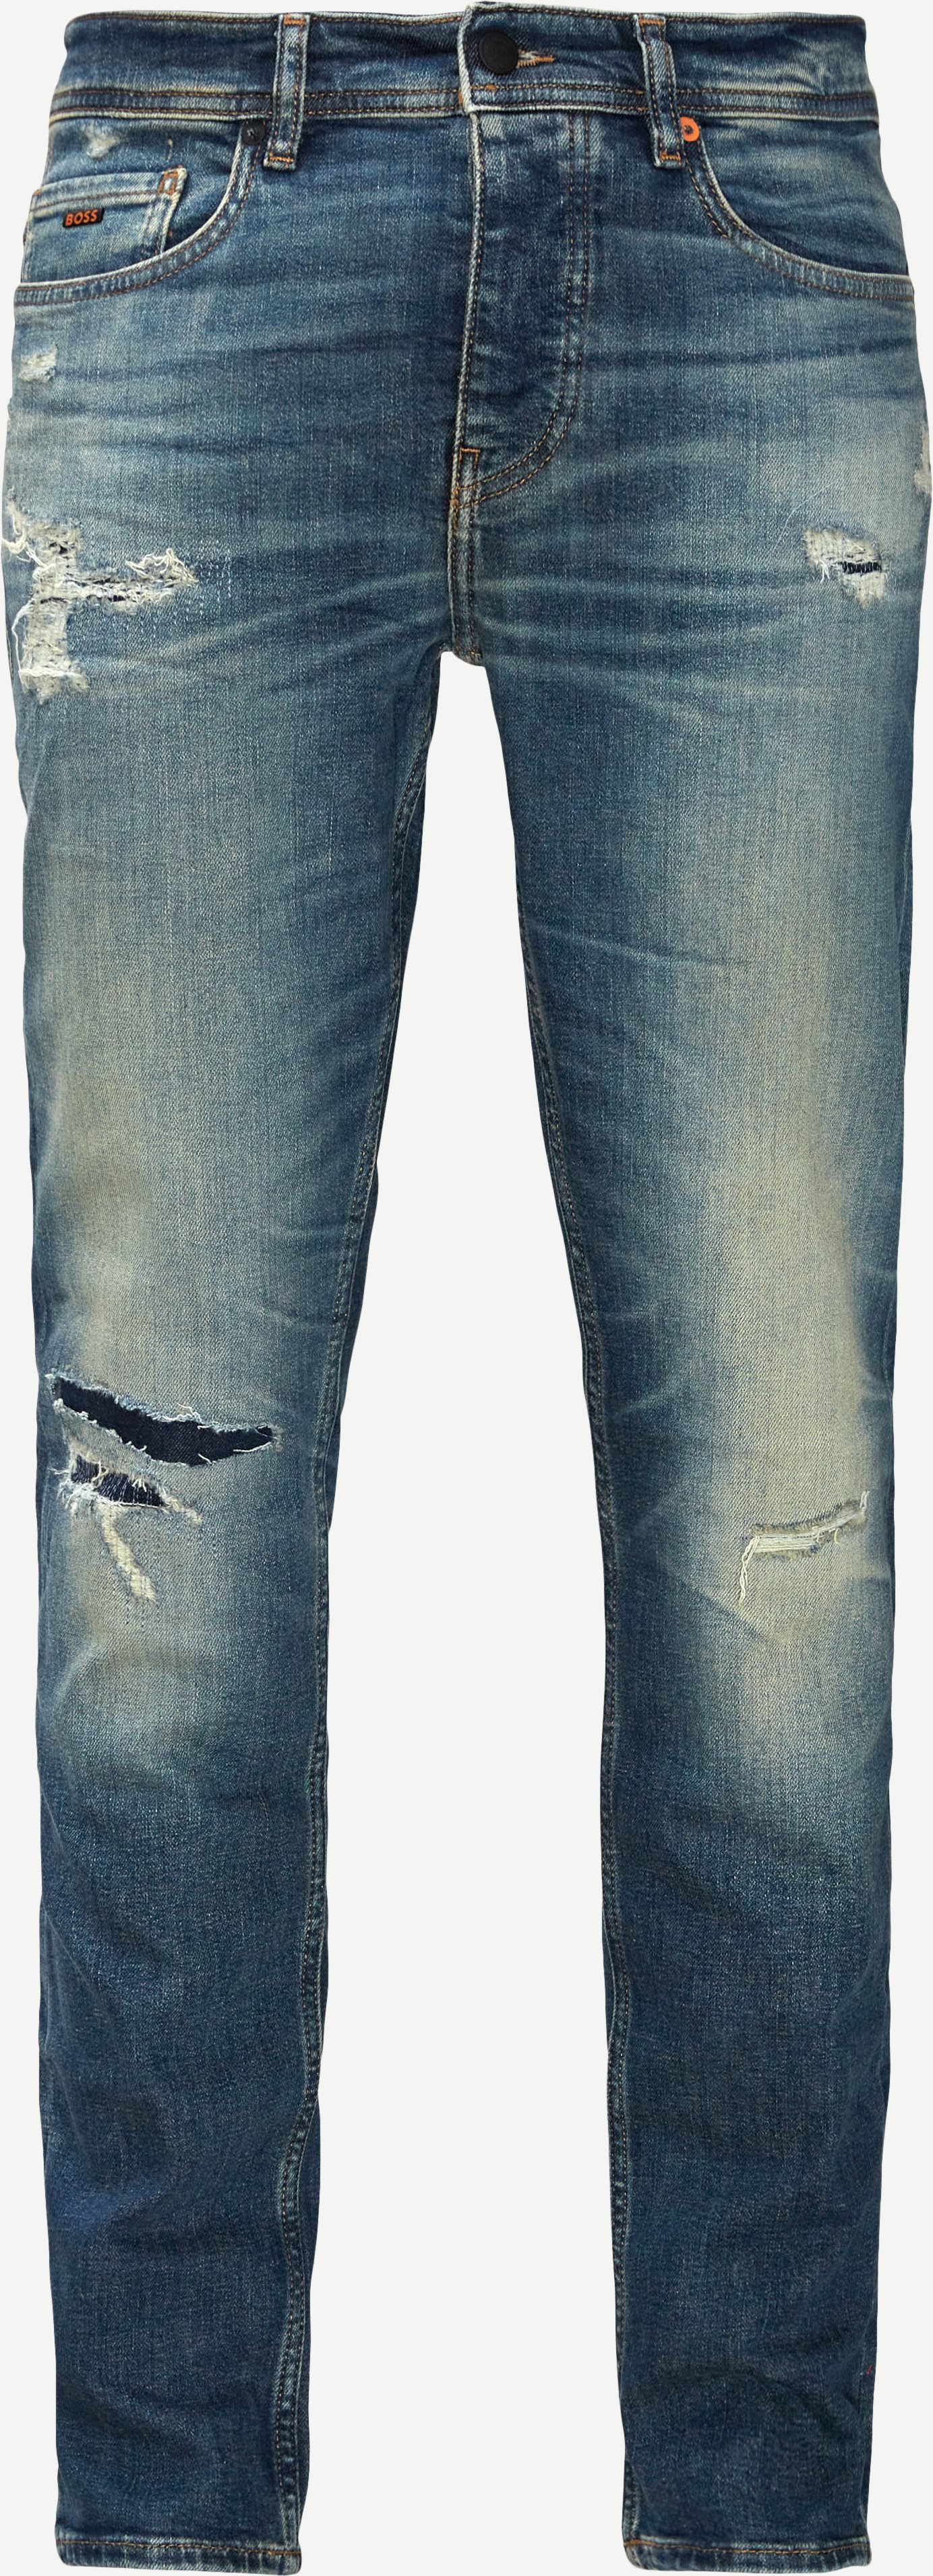 Taber BC-C Jeans - Jeans - Tapered fit - Denim